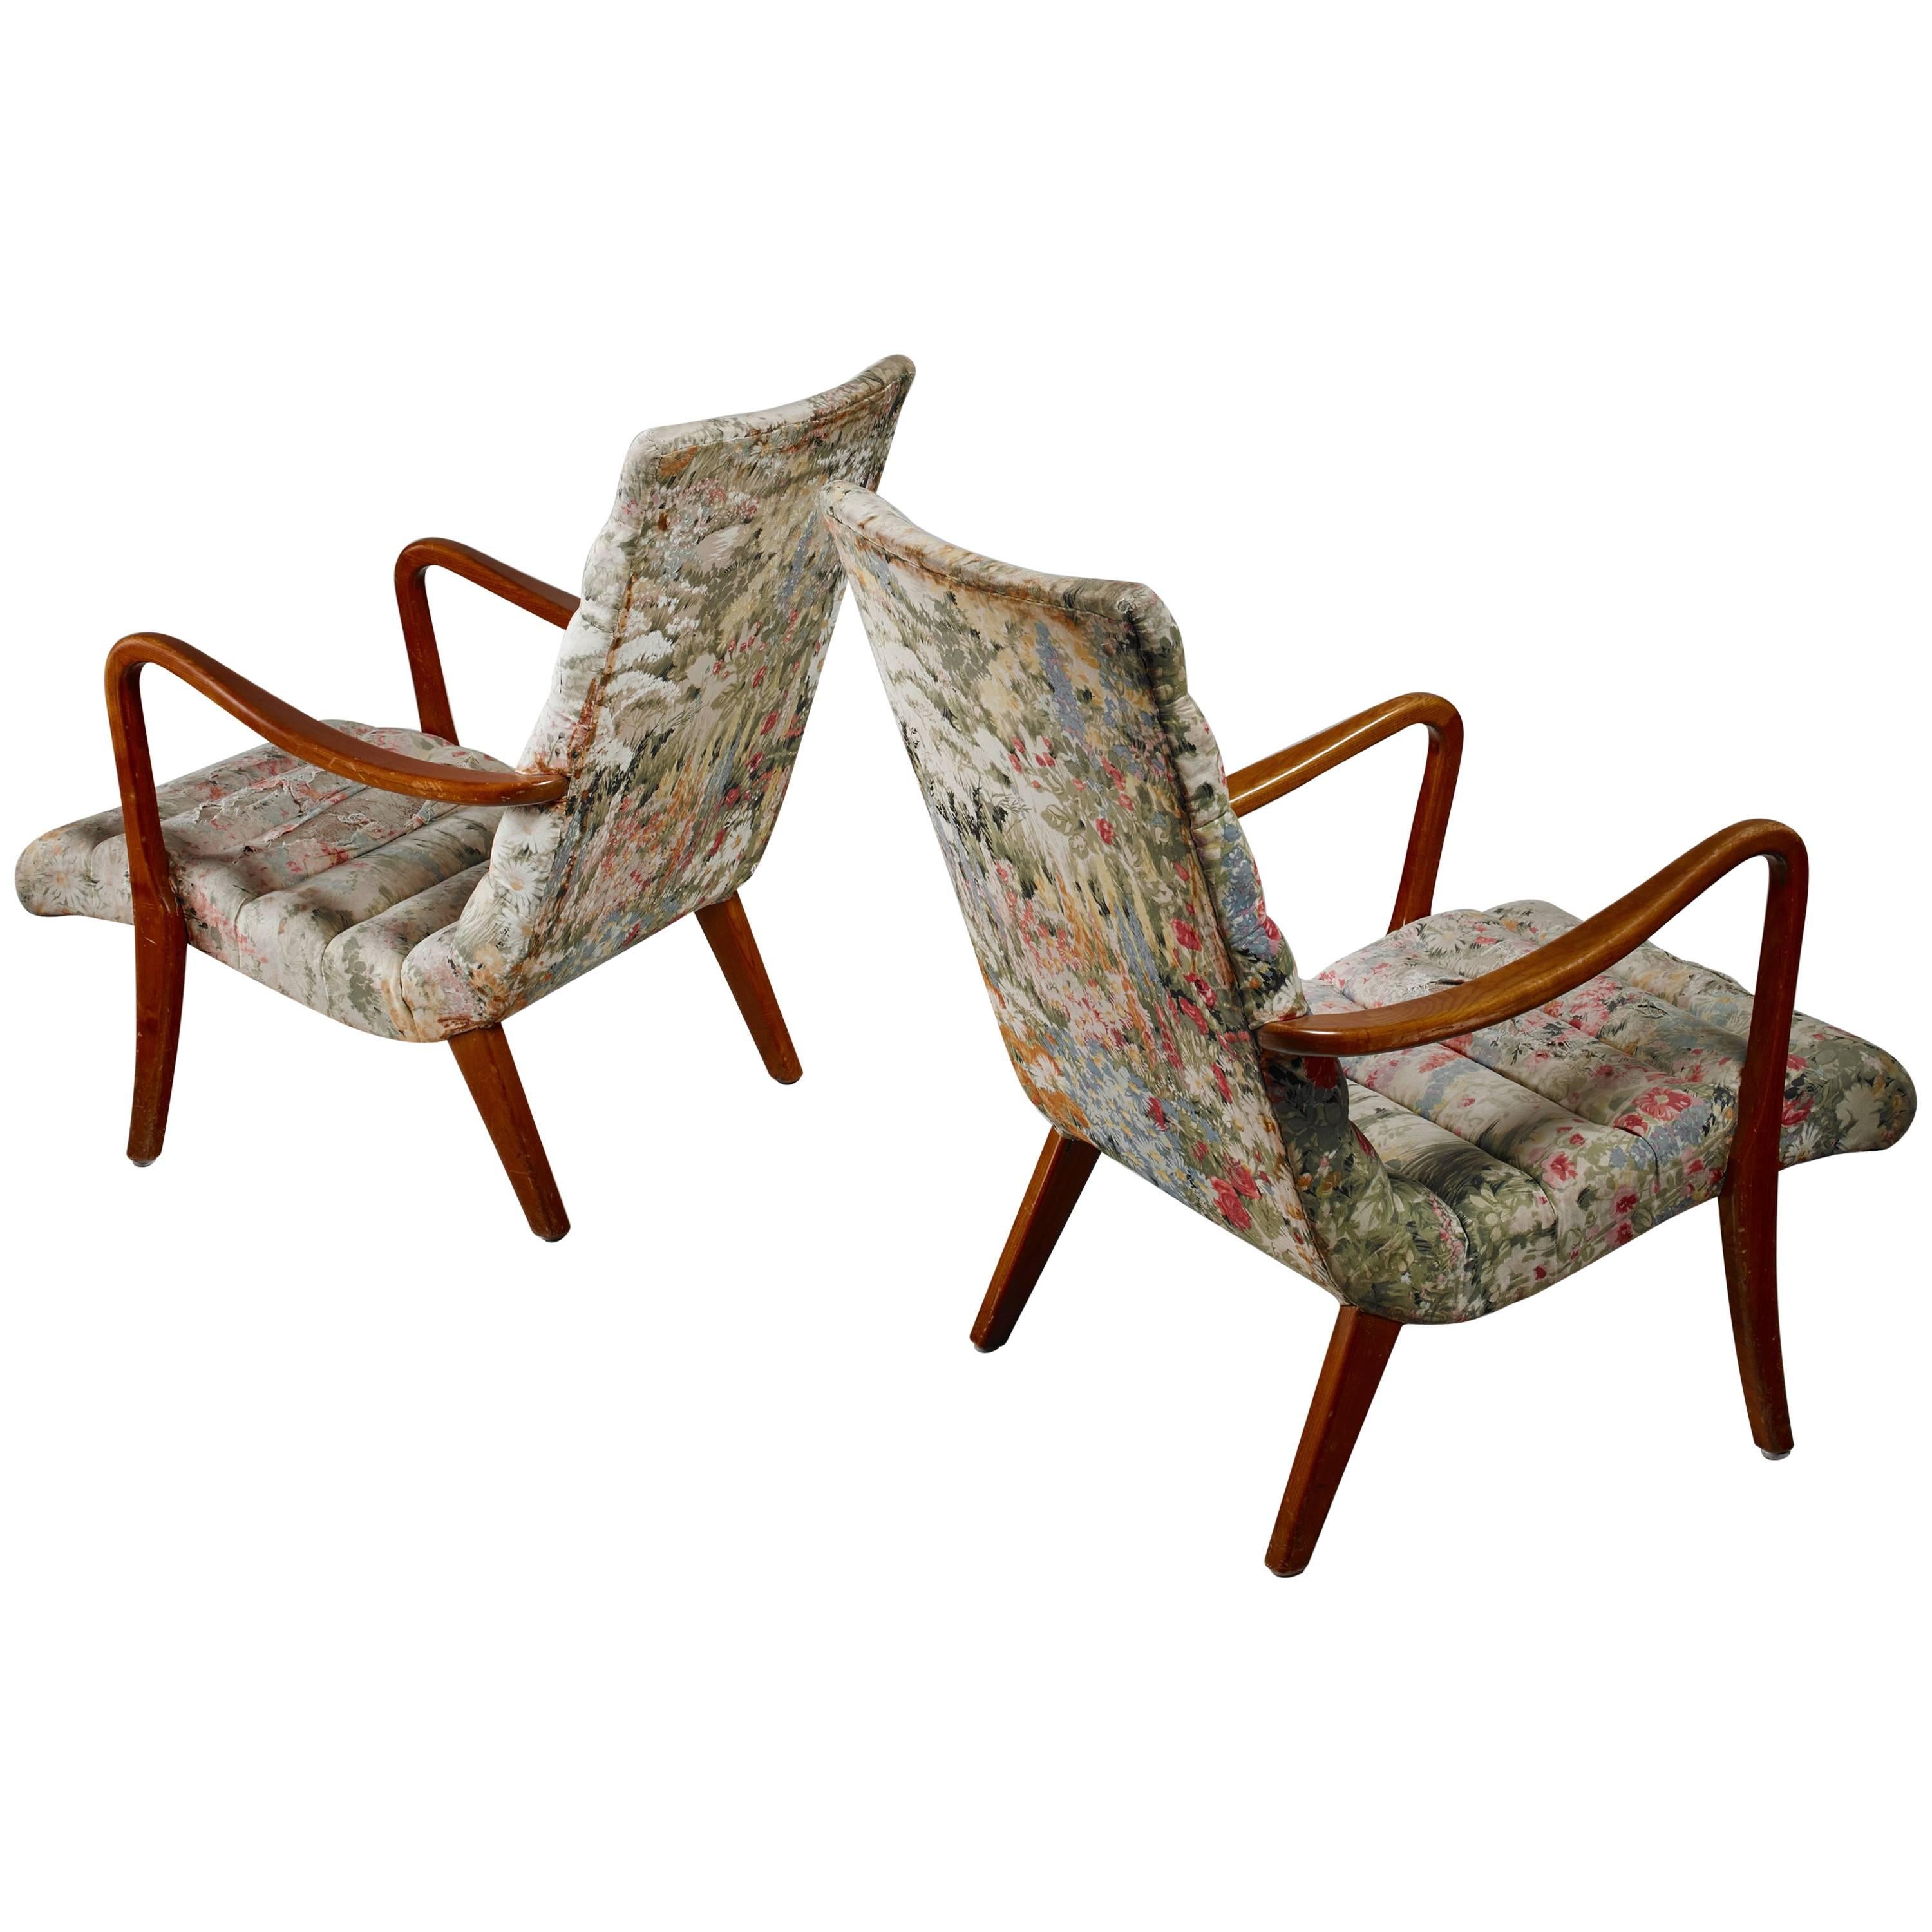 Pair of Axel Larsson Lounge Chairs, Bodafors, Sweden, 1940s For Sale